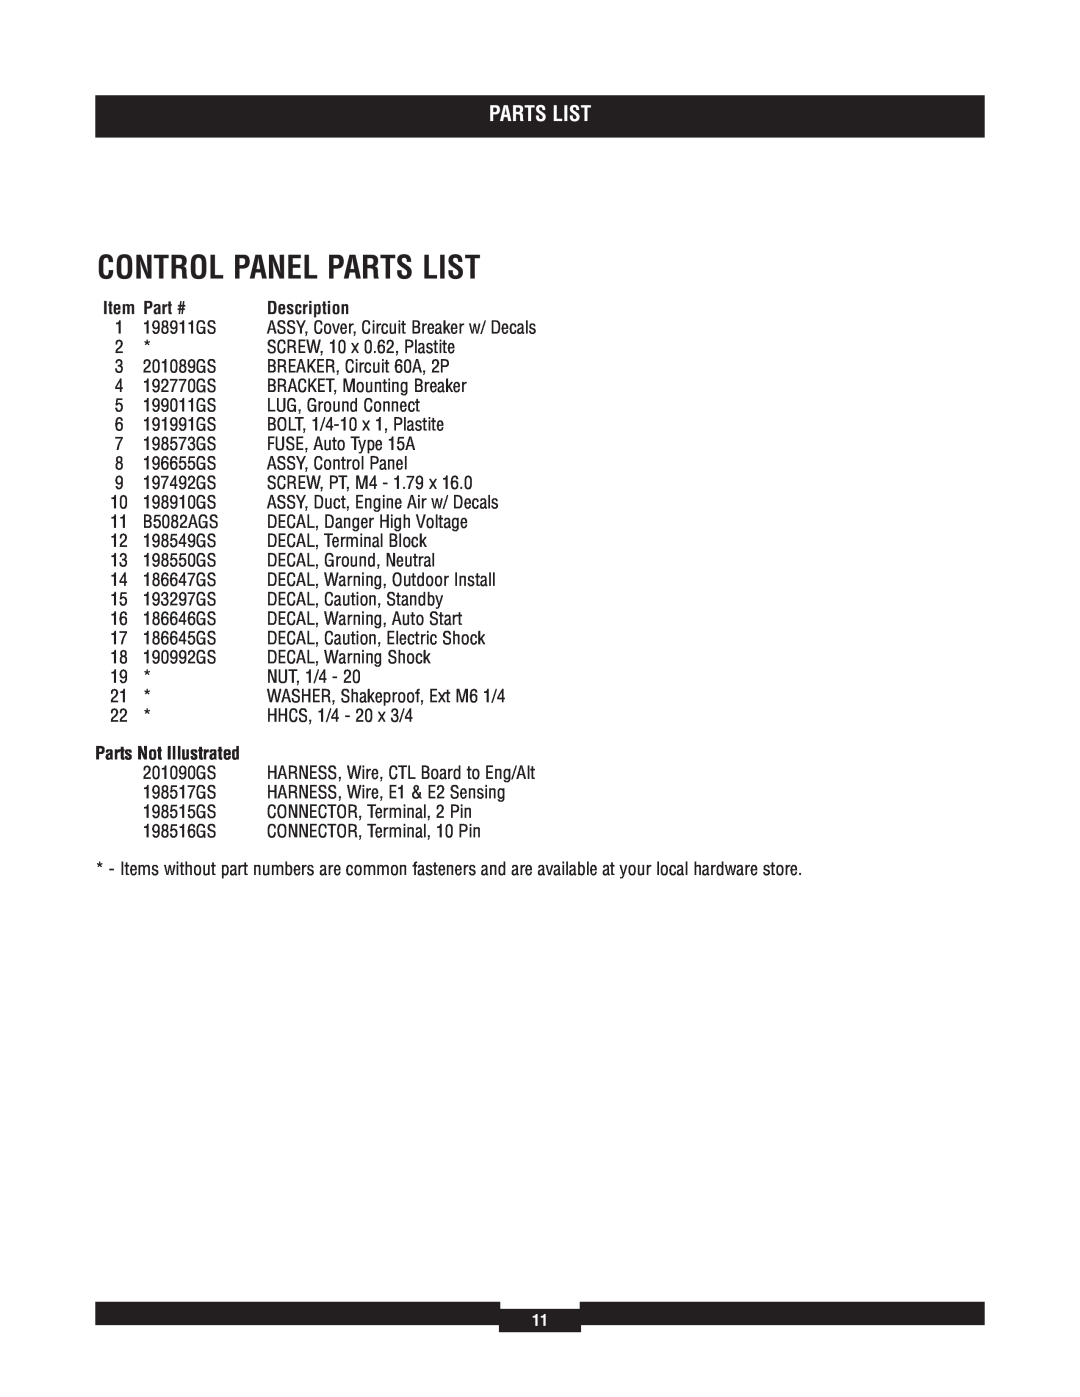 Briggs & Stratton 040212-1 manual Control Panel Parts List, Parts Not Illustrated 